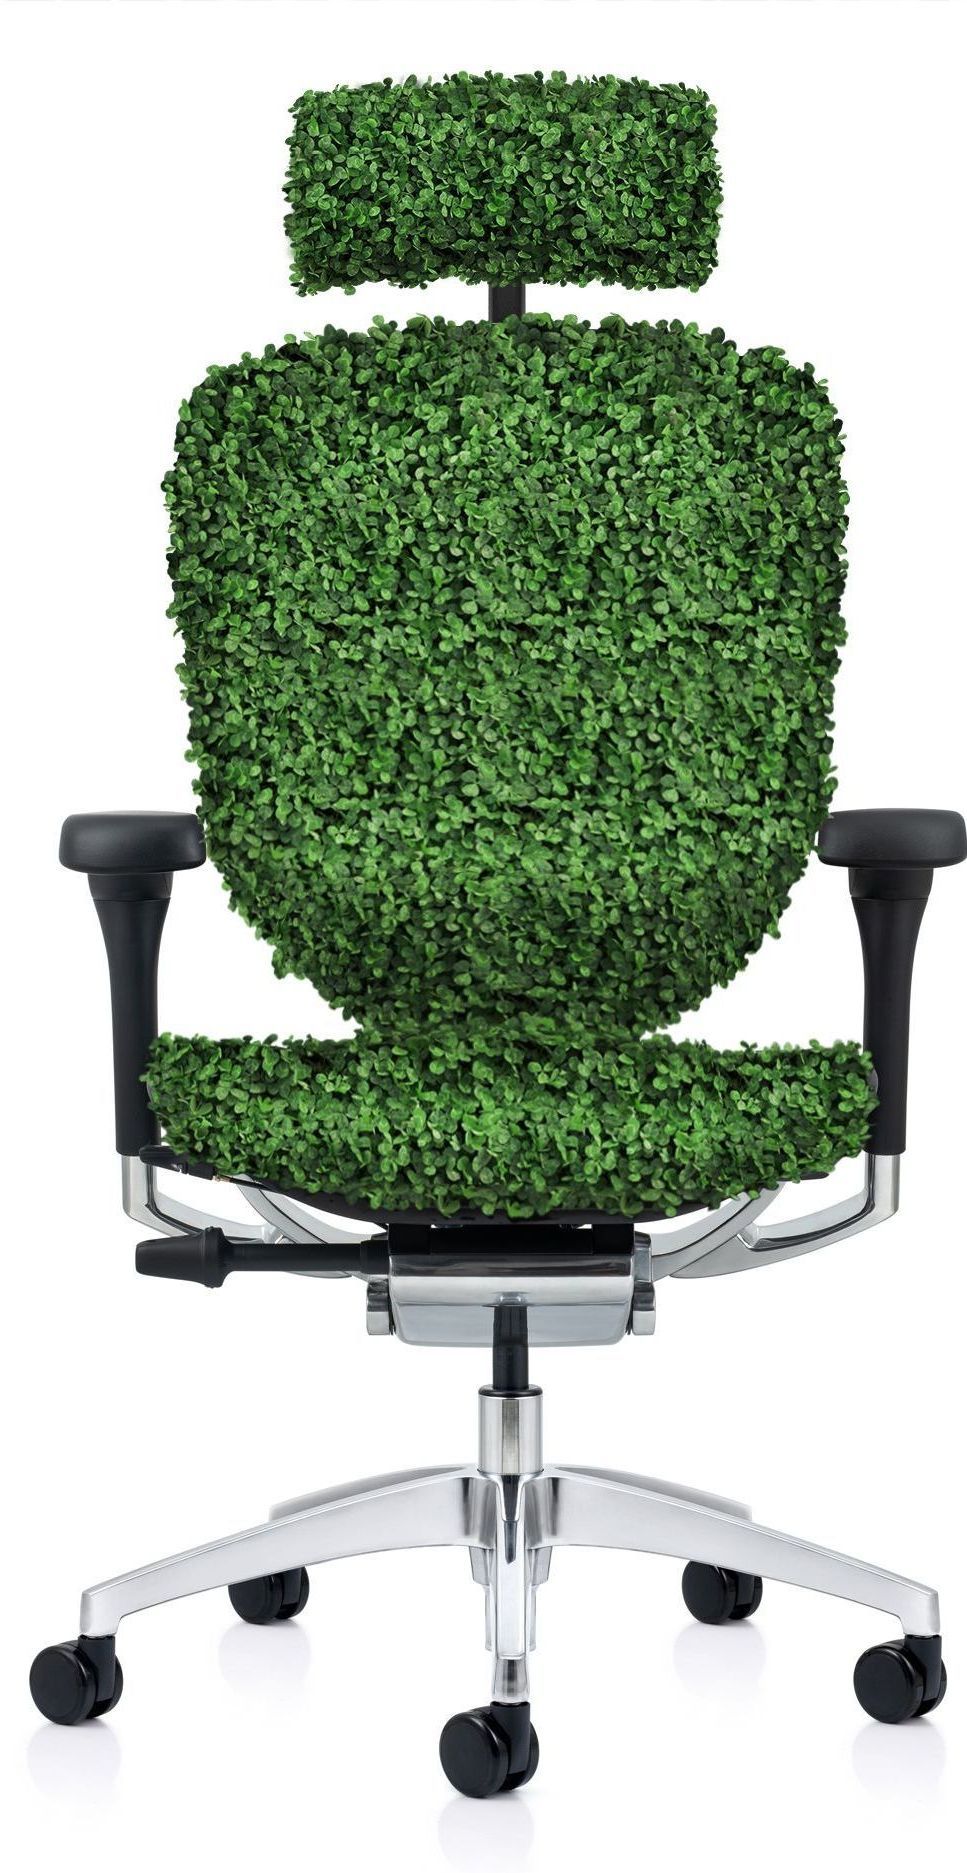 Comfort Enjoy Elite G2 chair covered in box hedge leaves